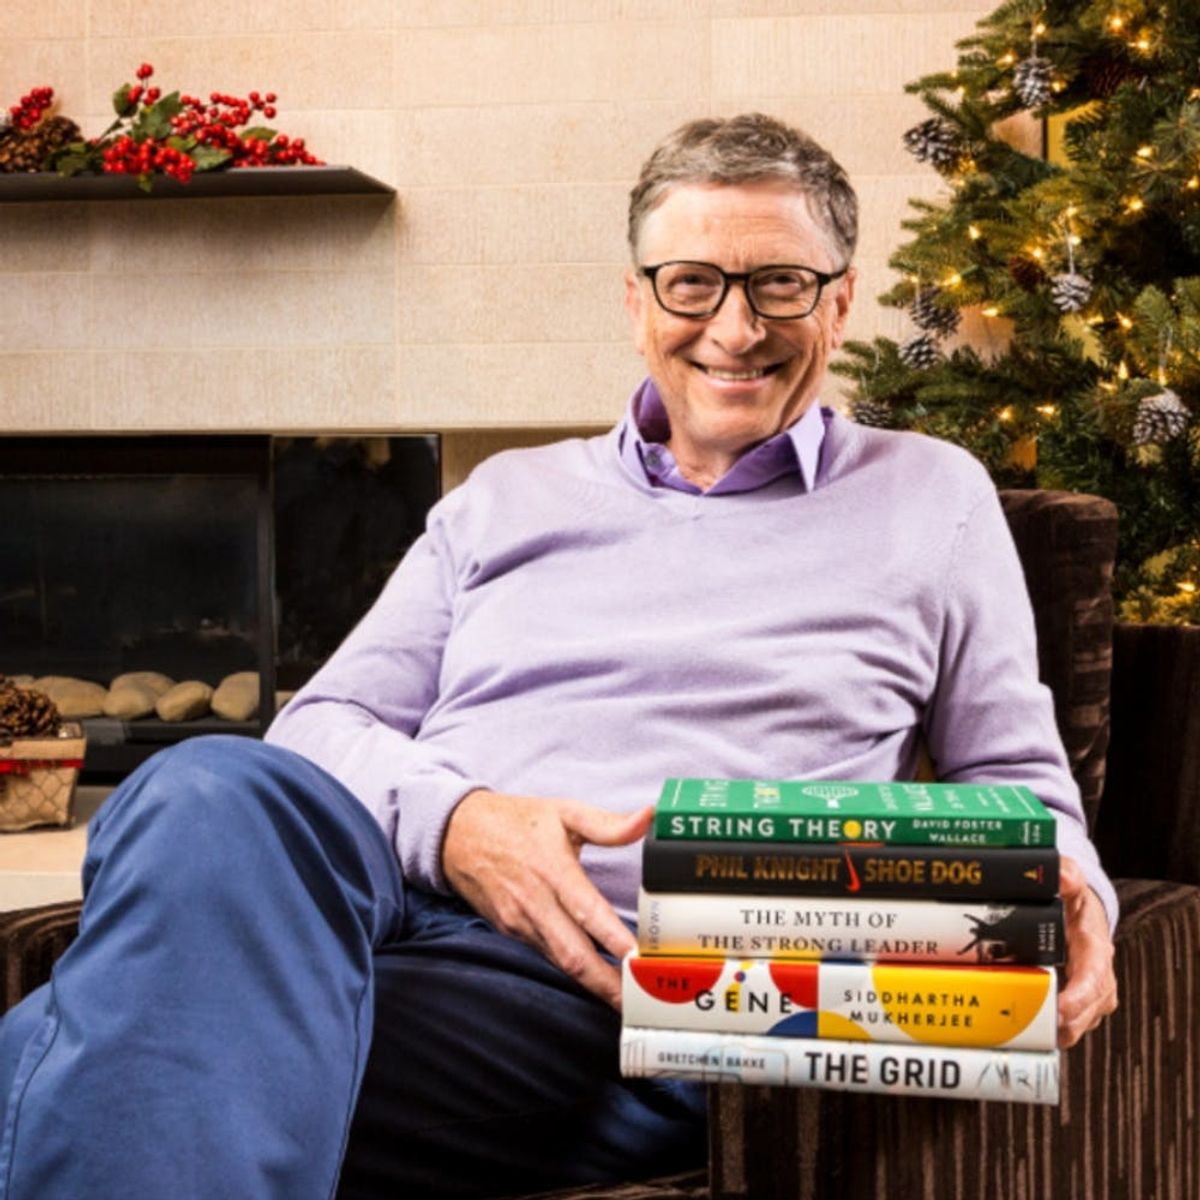 Bill Gates’ Top 2016 Reads Cover Everything from Shoes to Leadership